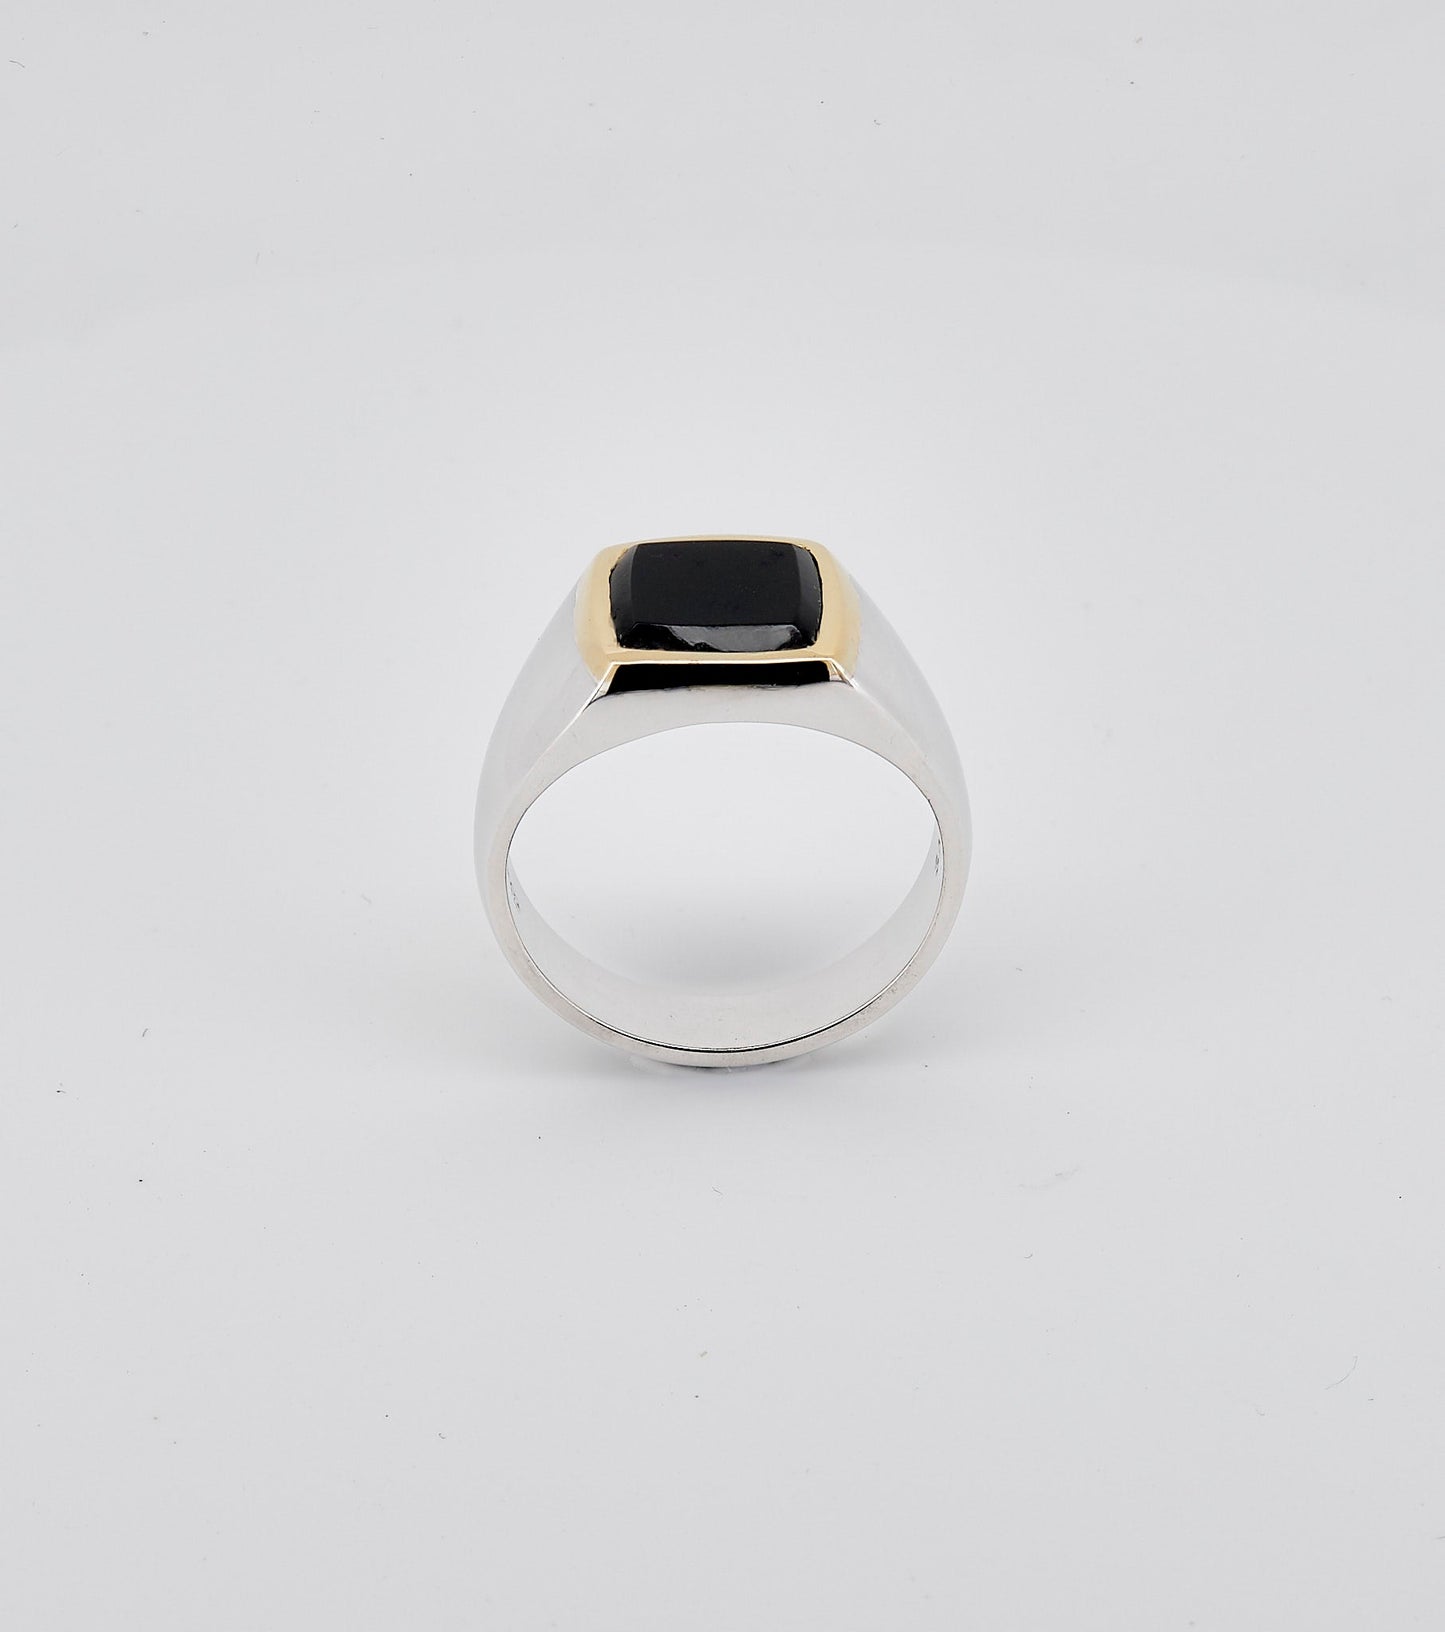 Framed Cushion Signet Ring with Onyx - Sar Jewellery